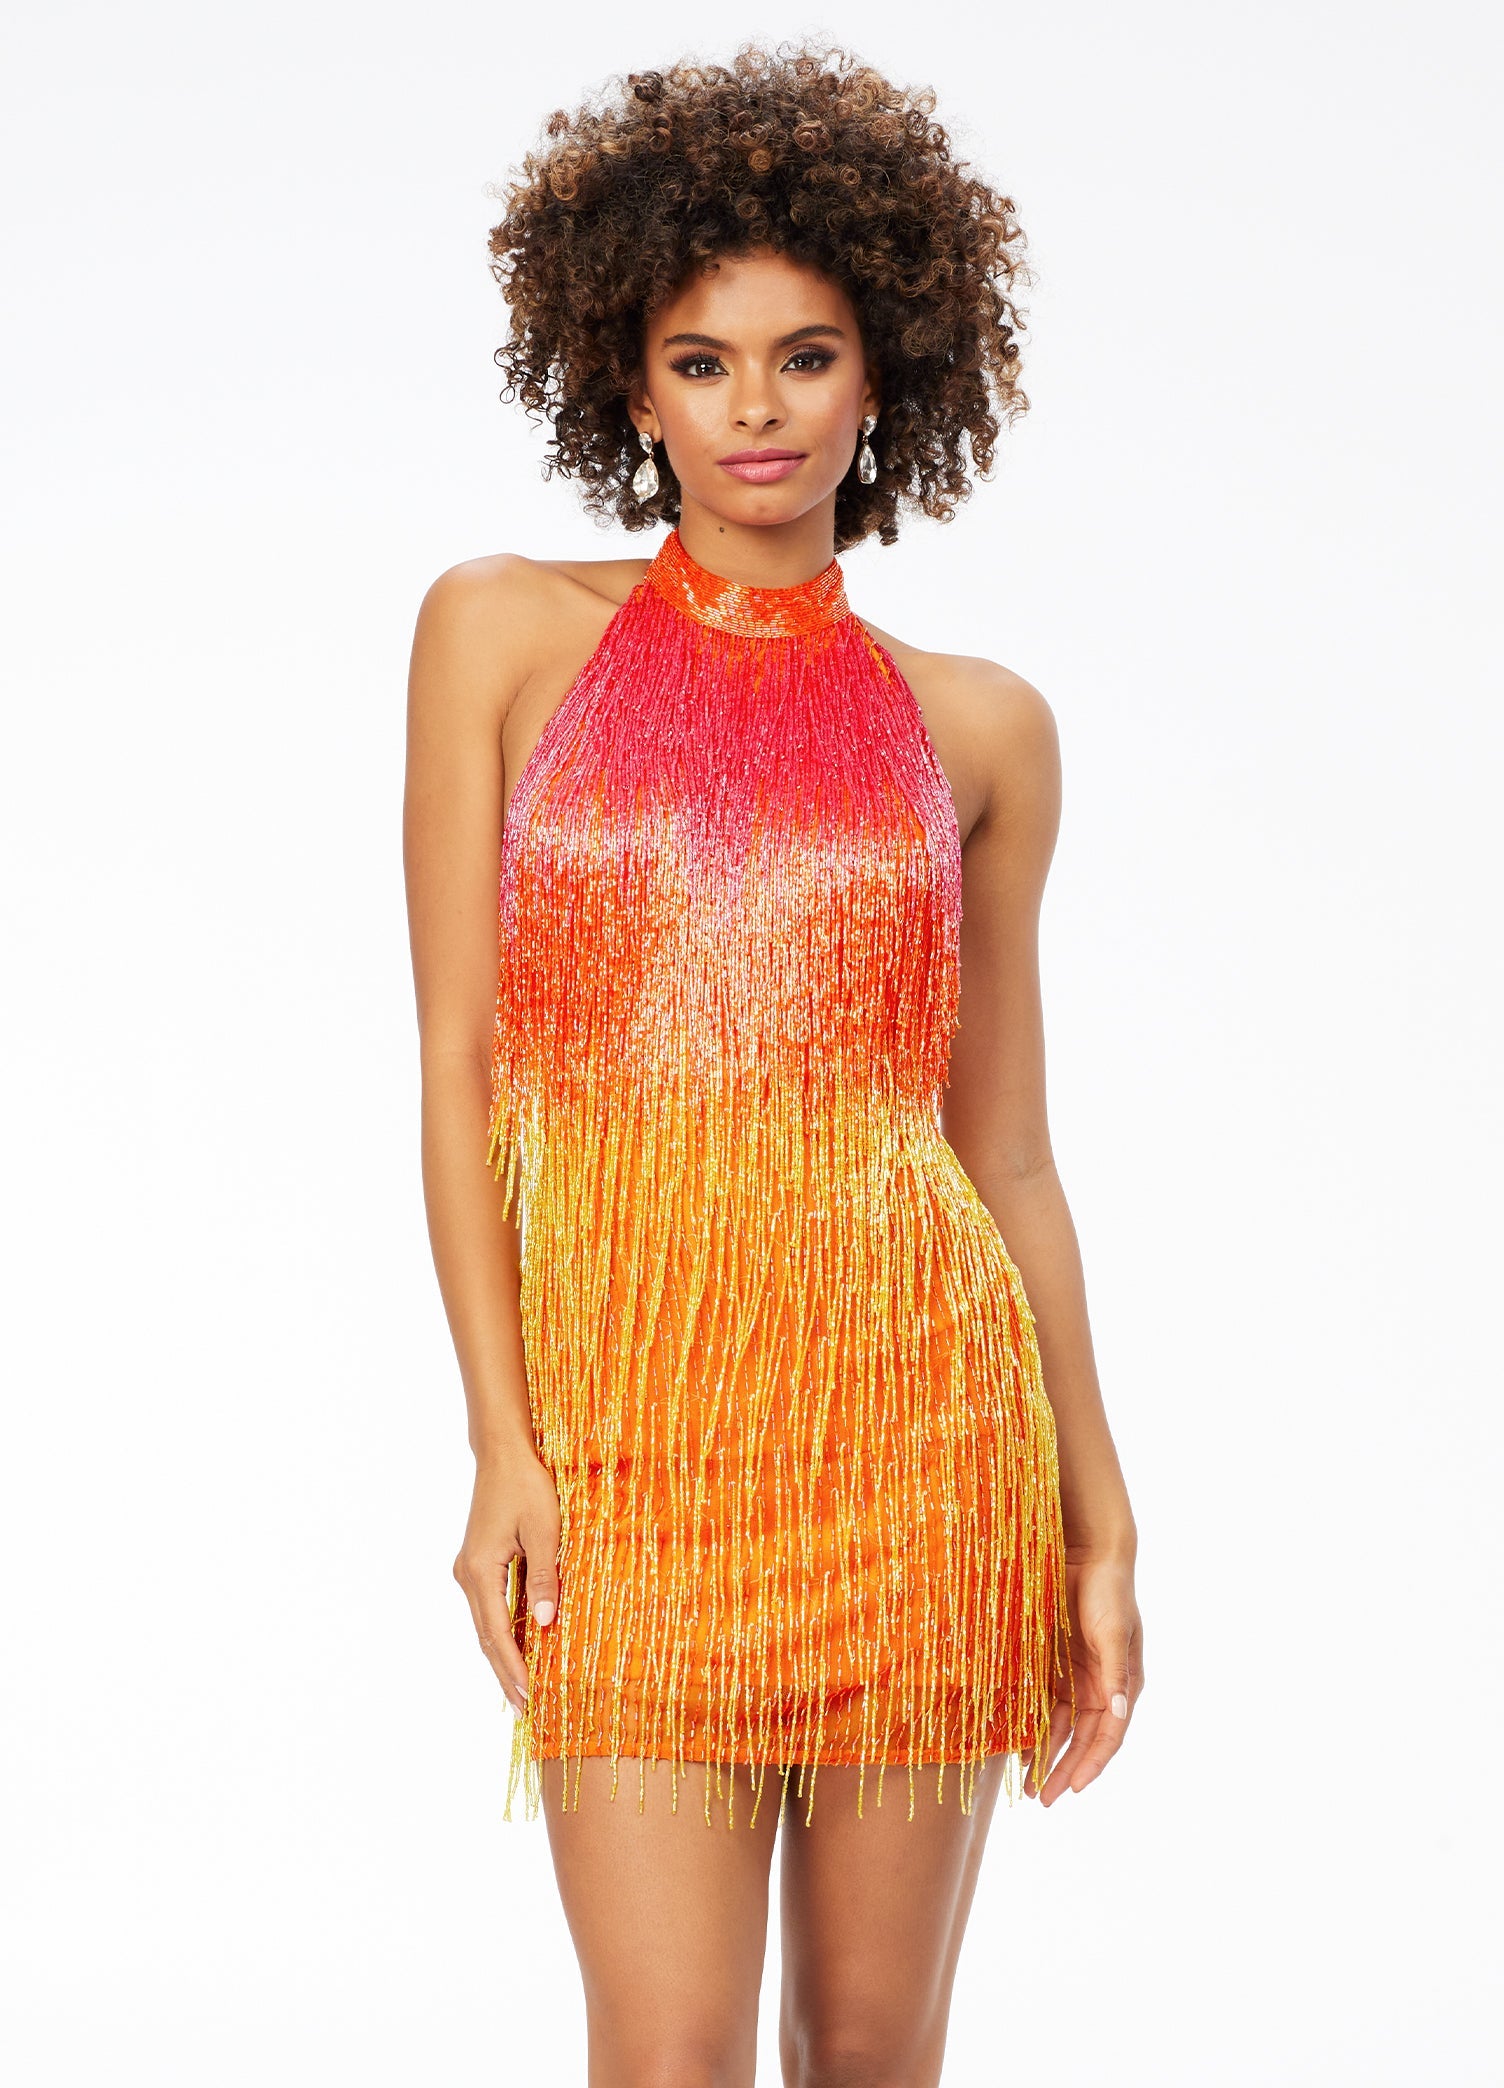 Ashley Lauren 4505  Stand out in this striking ombré fringe cocktail dress featuring a halter neckline, fitted skirt and plunging low back.  Available colors:  Multi, Sunset, Electric Raspberry, Blue